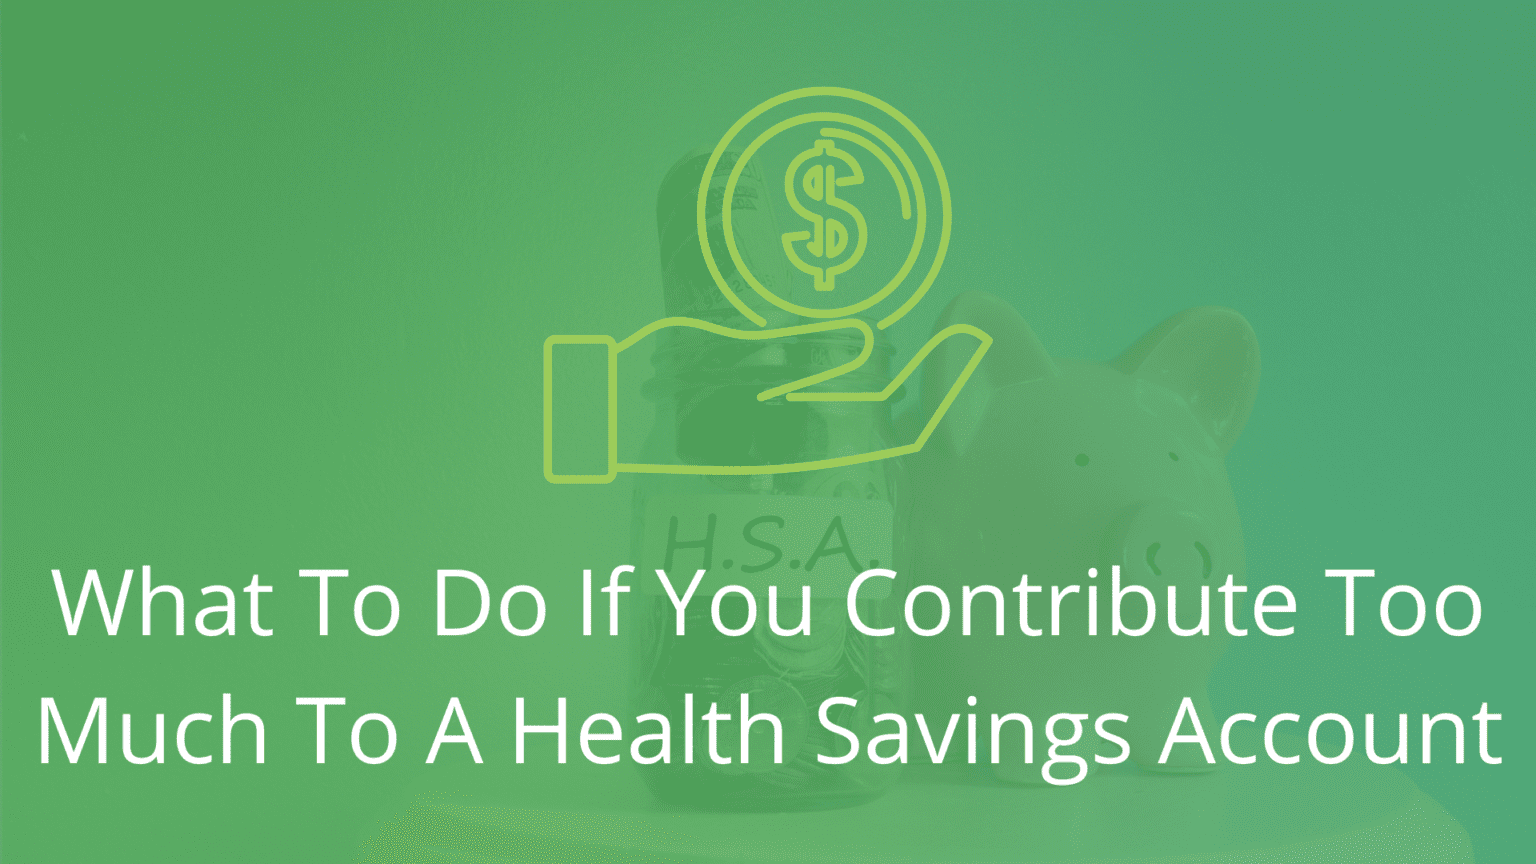 What to Do if You Contribute Too Much to a Health Savings Account